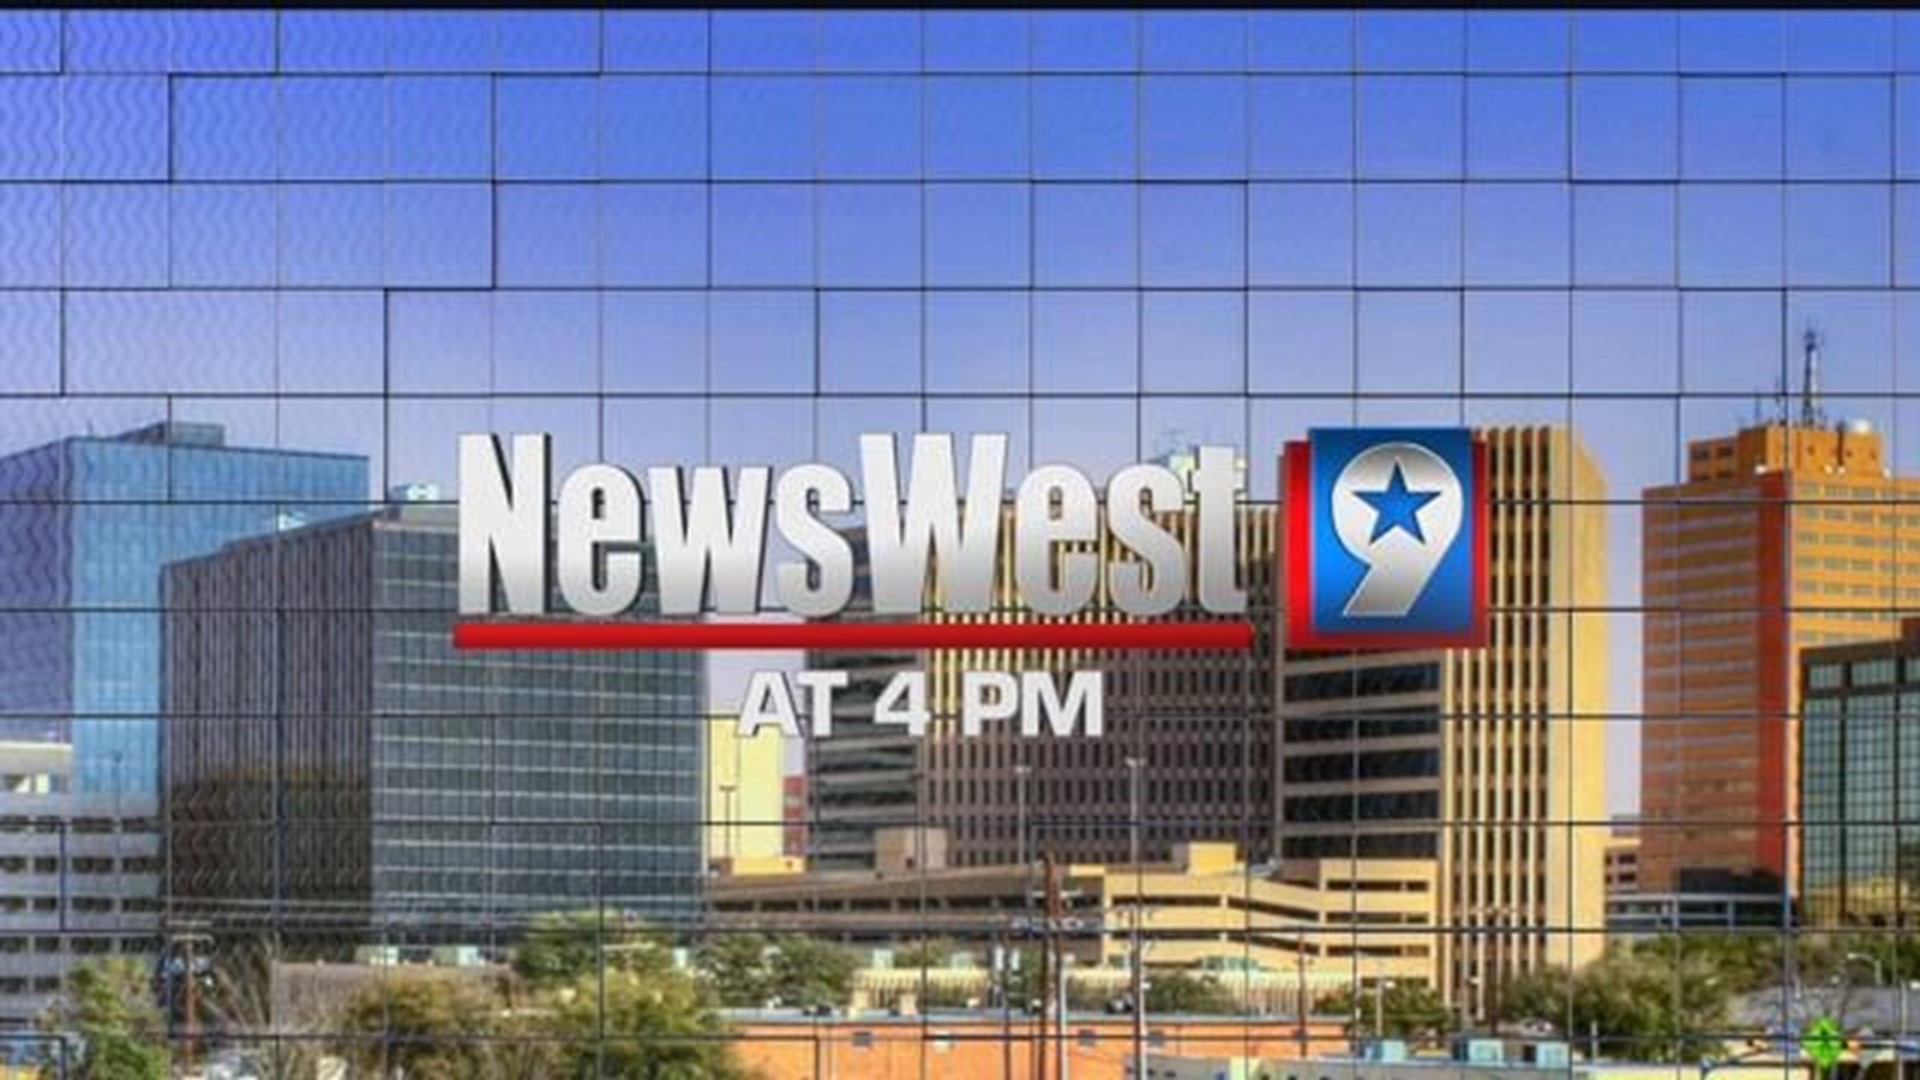 NewsWest 9 at 4 pm